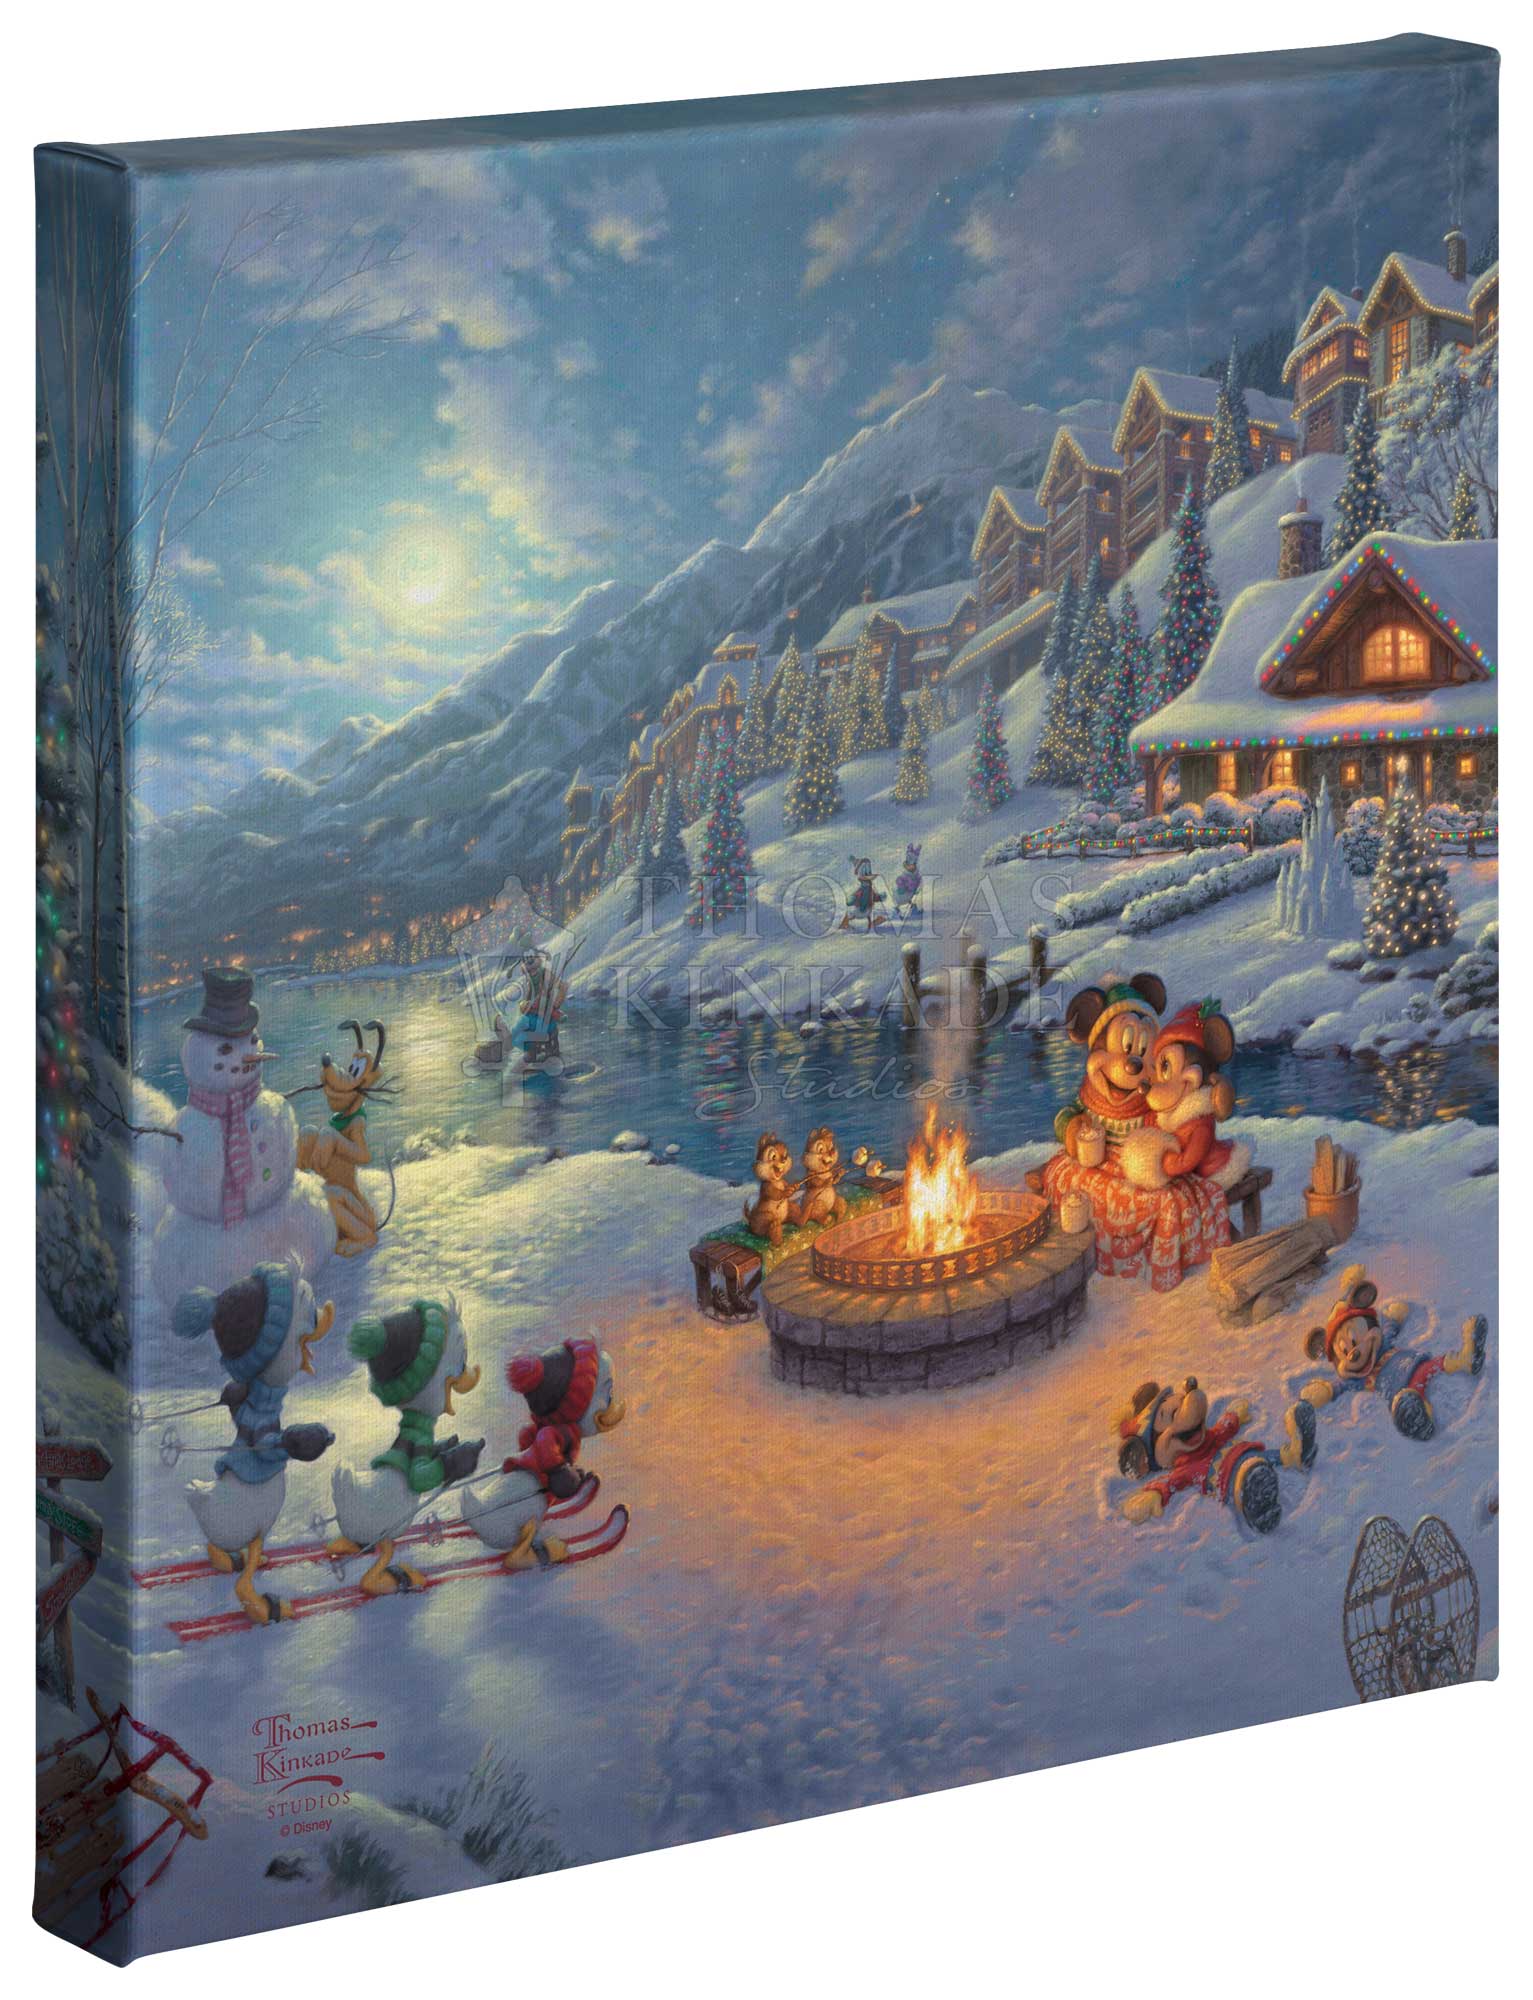 Holiday lights sparkle, and brilliant white snow glistens as some of our favorite Disney friends enjoy the season's festivities in a beautiful winter wonderland! 14x14 Gallery Wraps